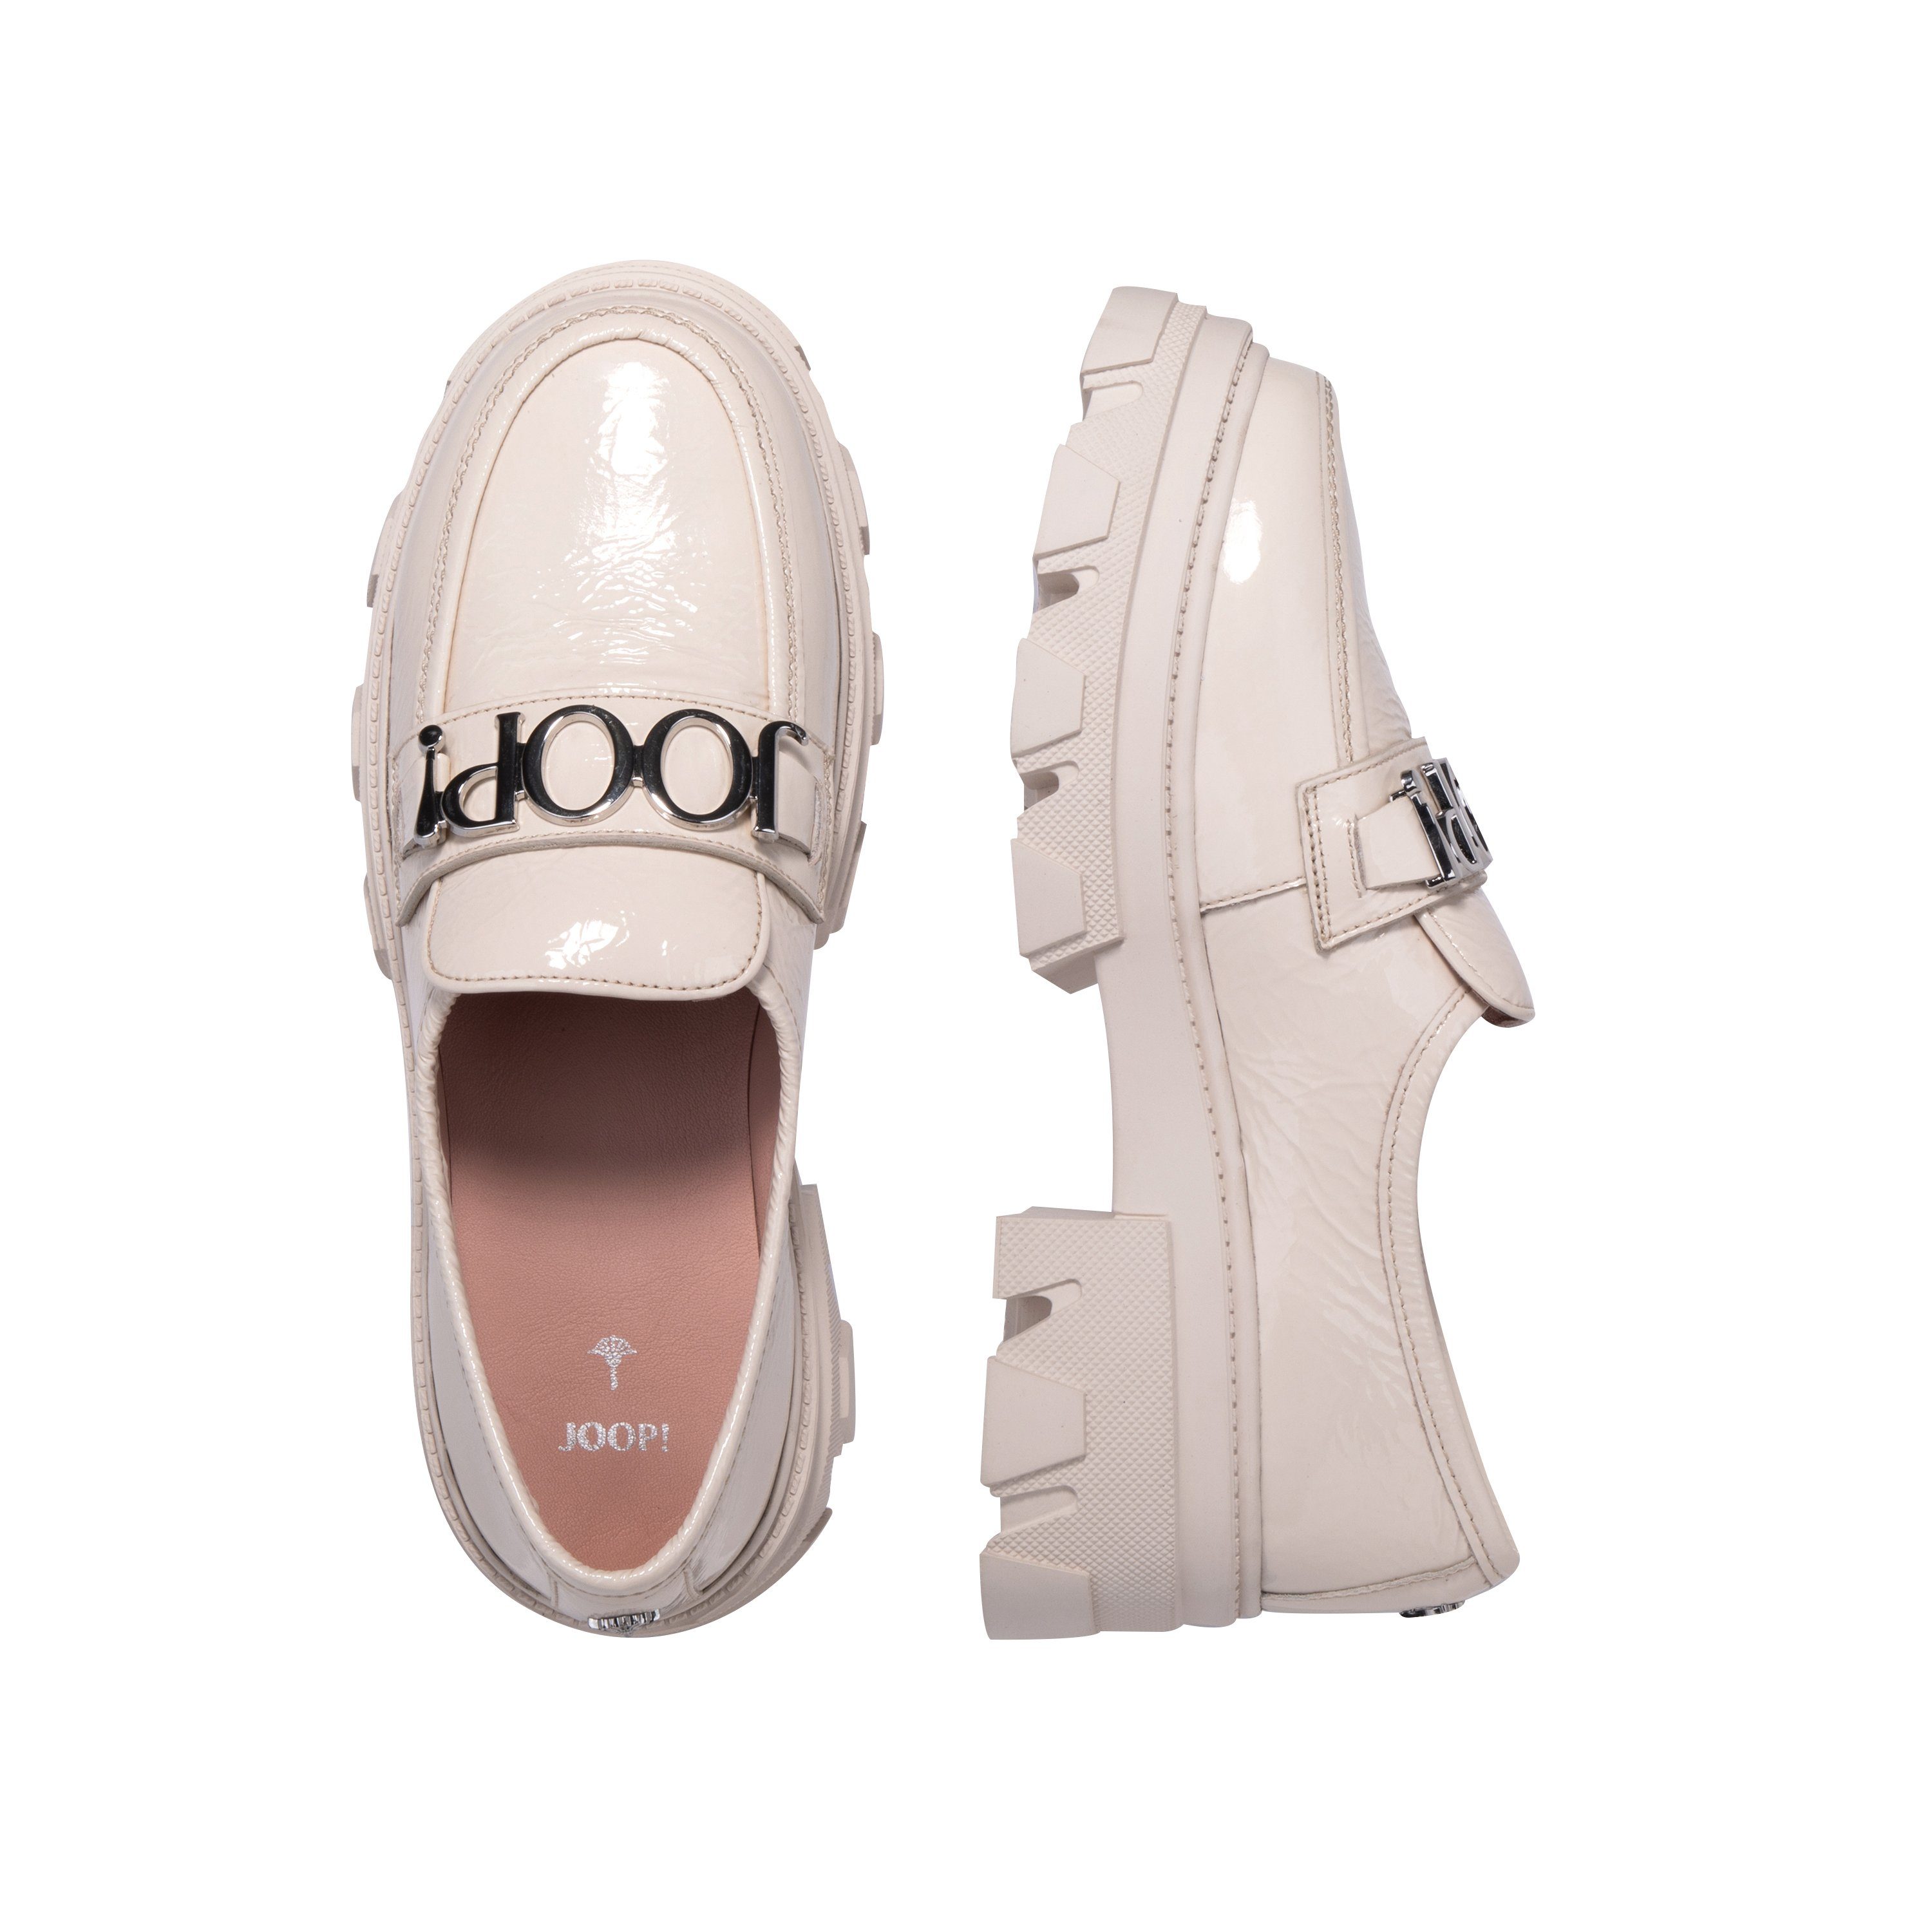 Joop! Slipper outer: cow leather, white inner: leather cow